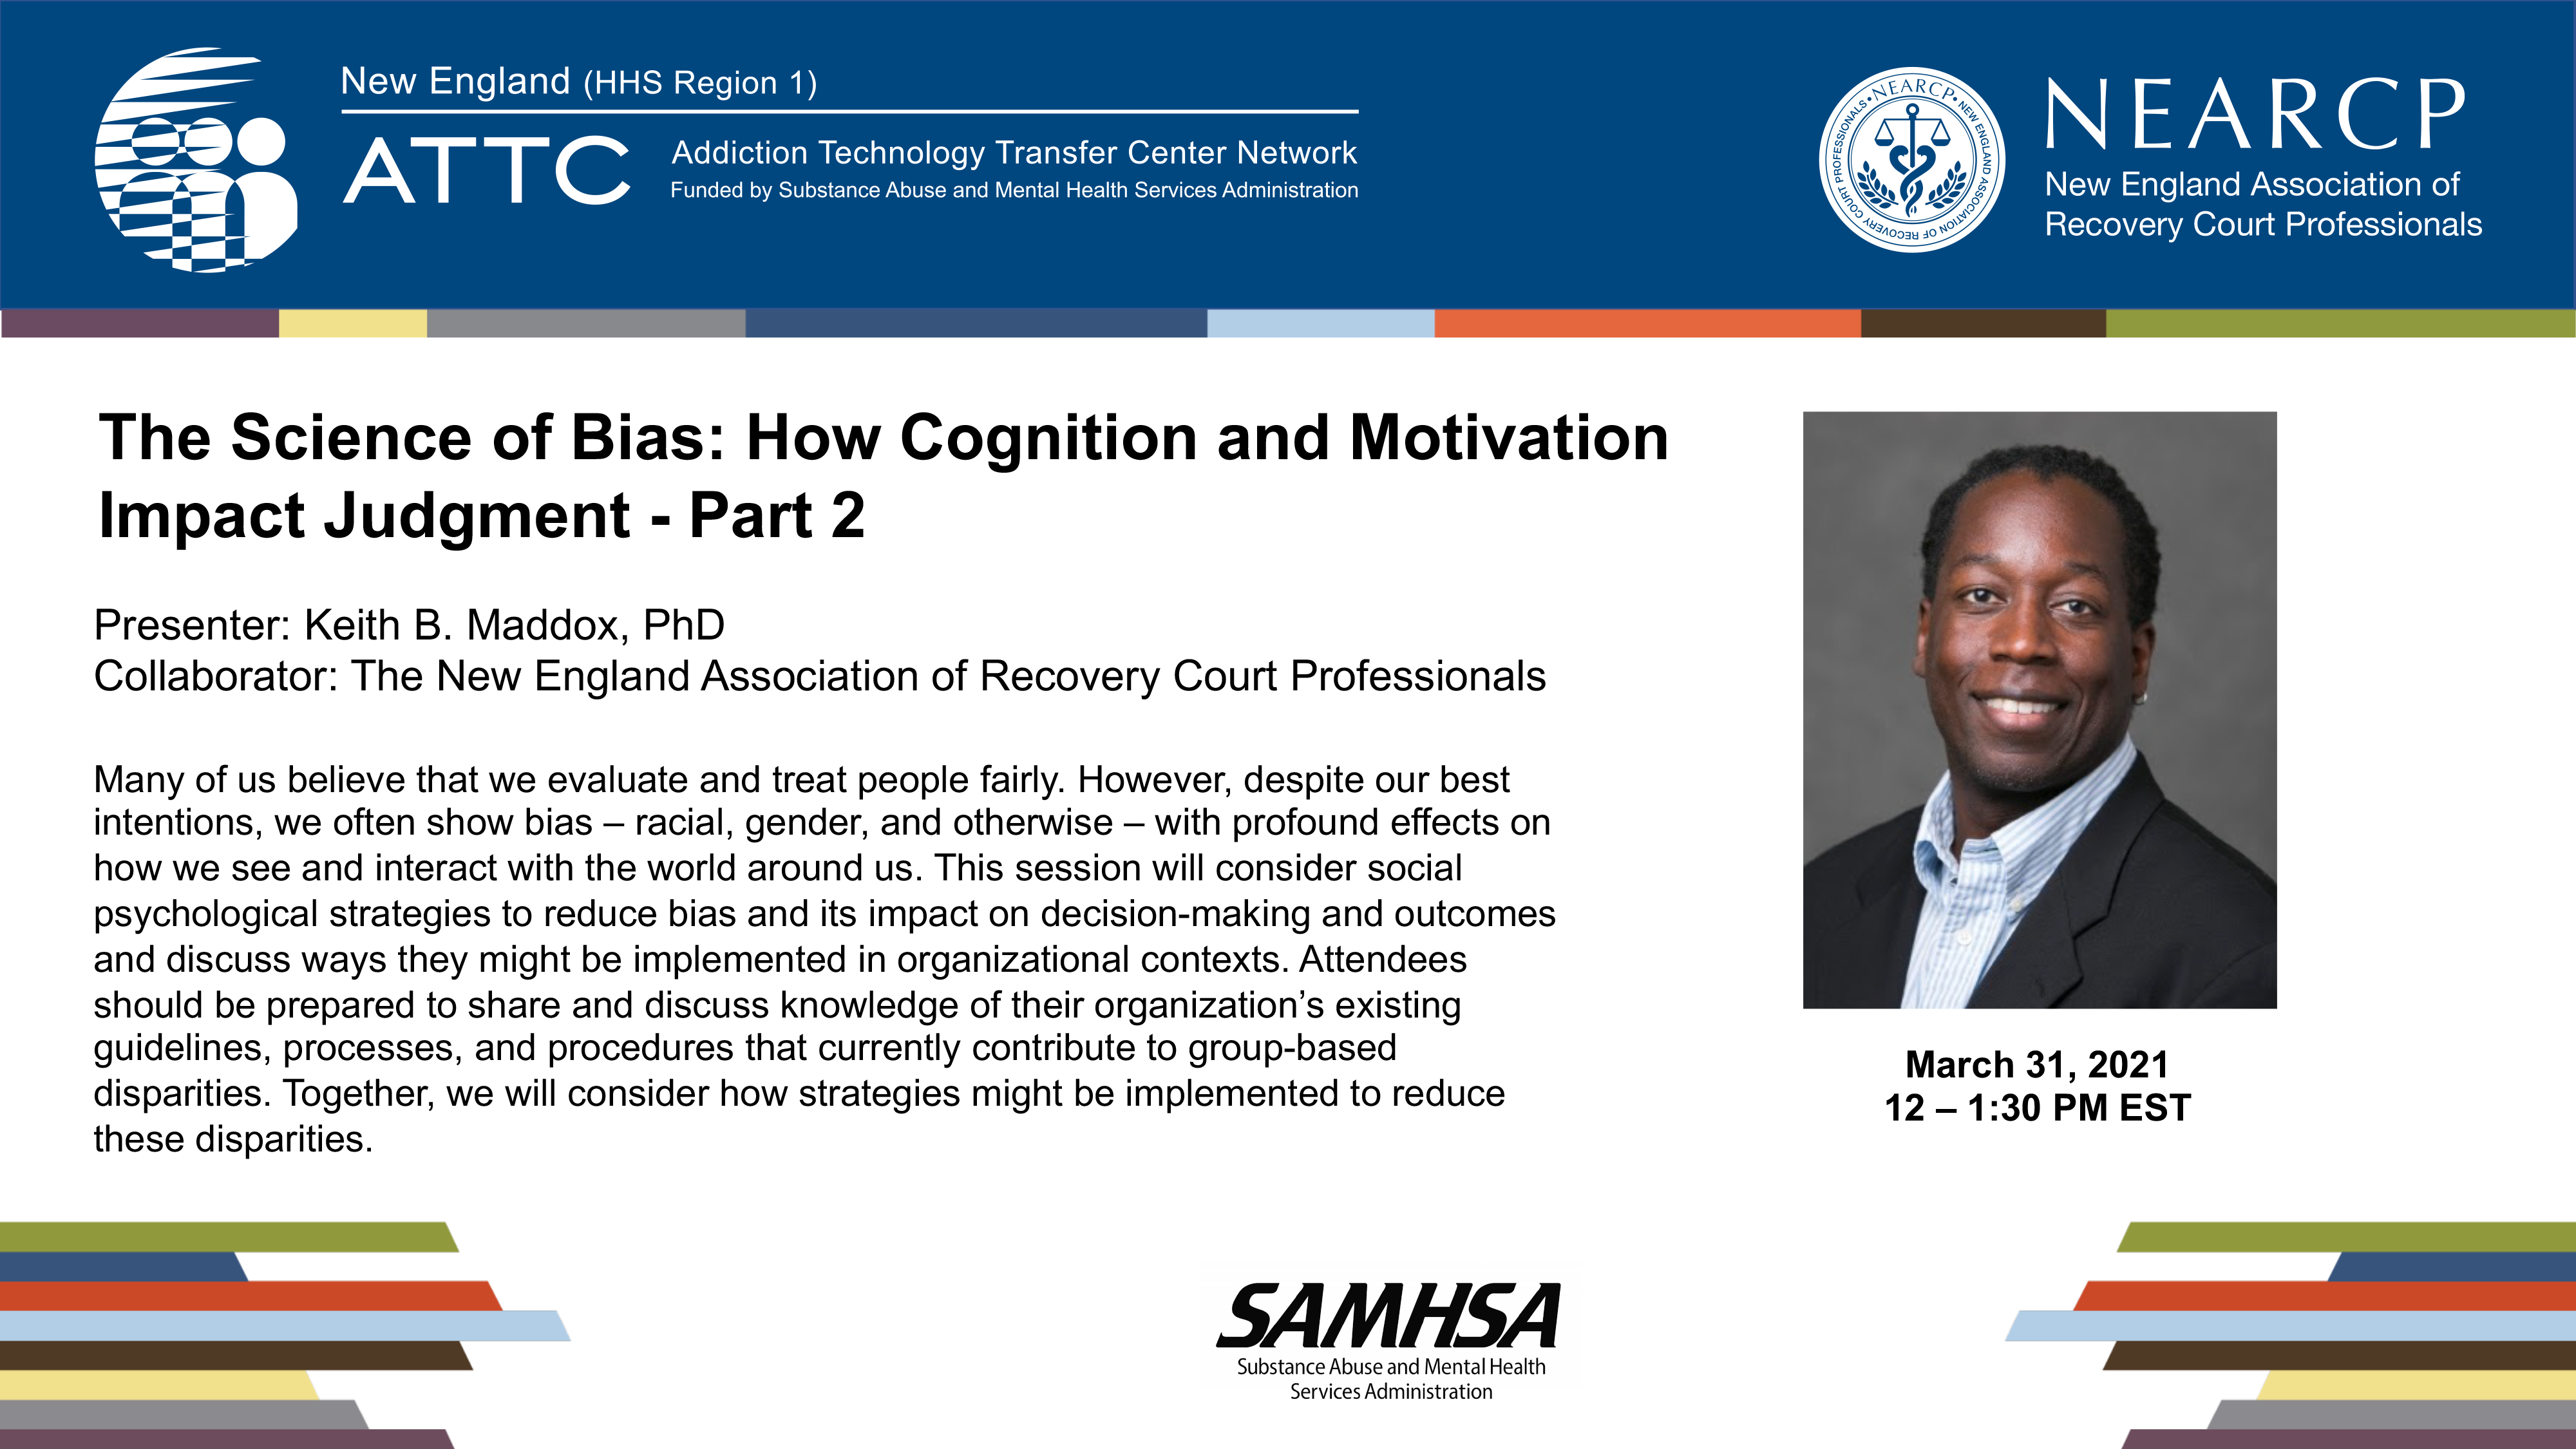 The Science of Bias: How Cognition and Motivation Impact Judgment Part 2 - Webinar Recording